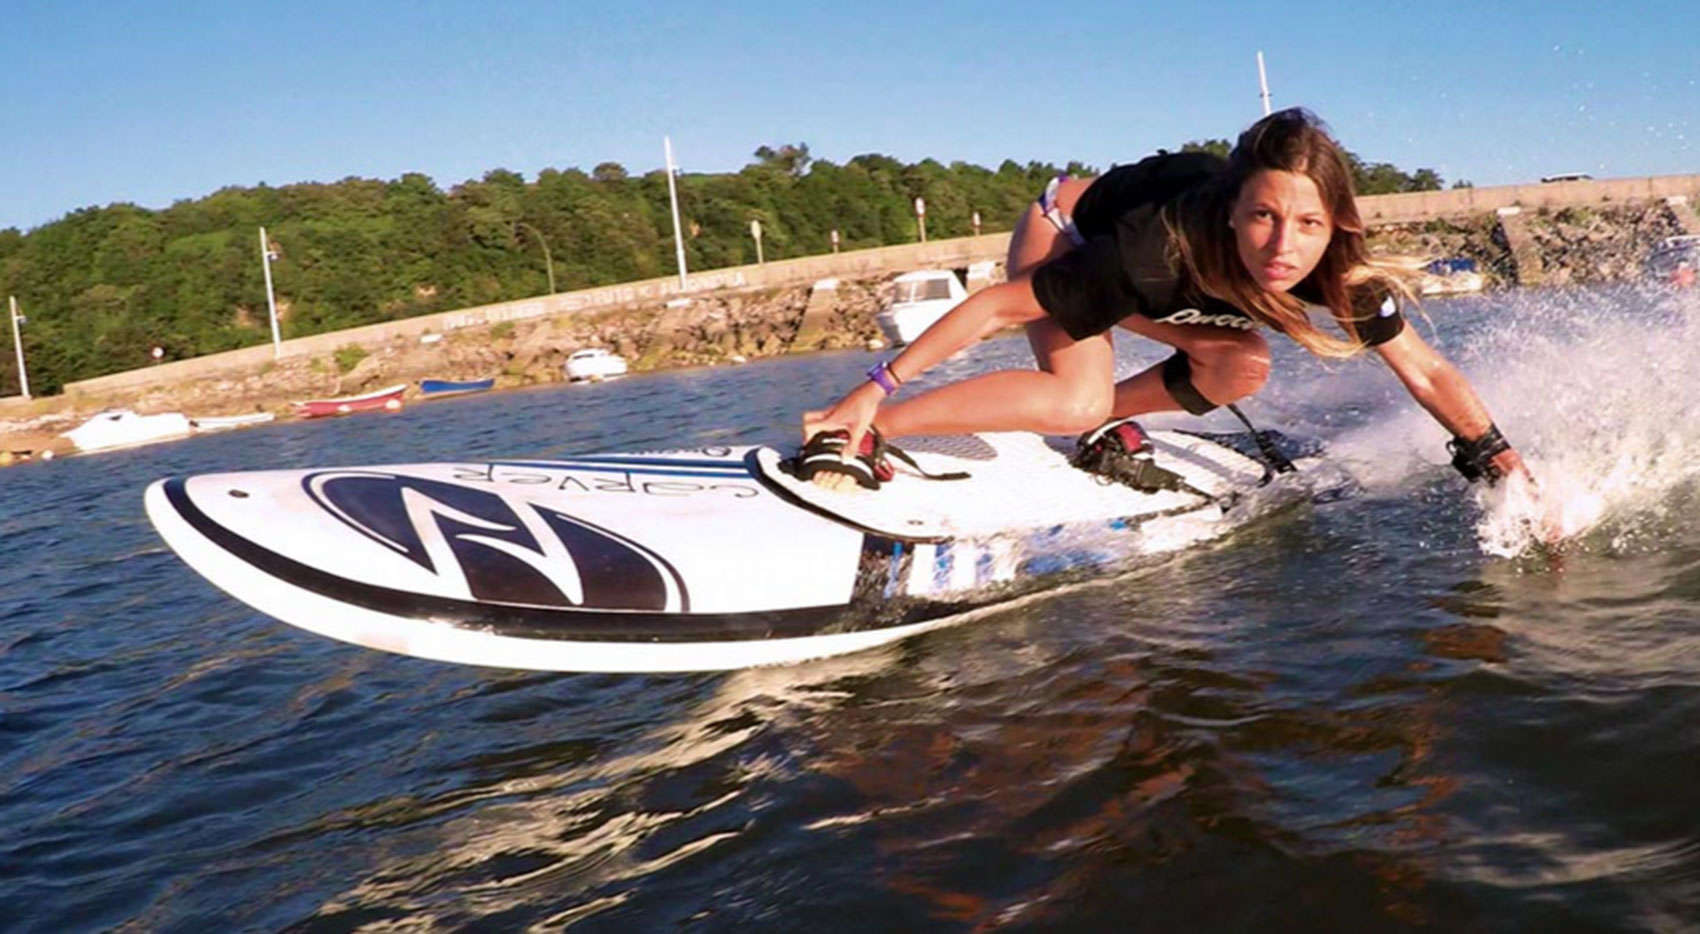 The Carver, by Onean, lets you surf on any body of water.